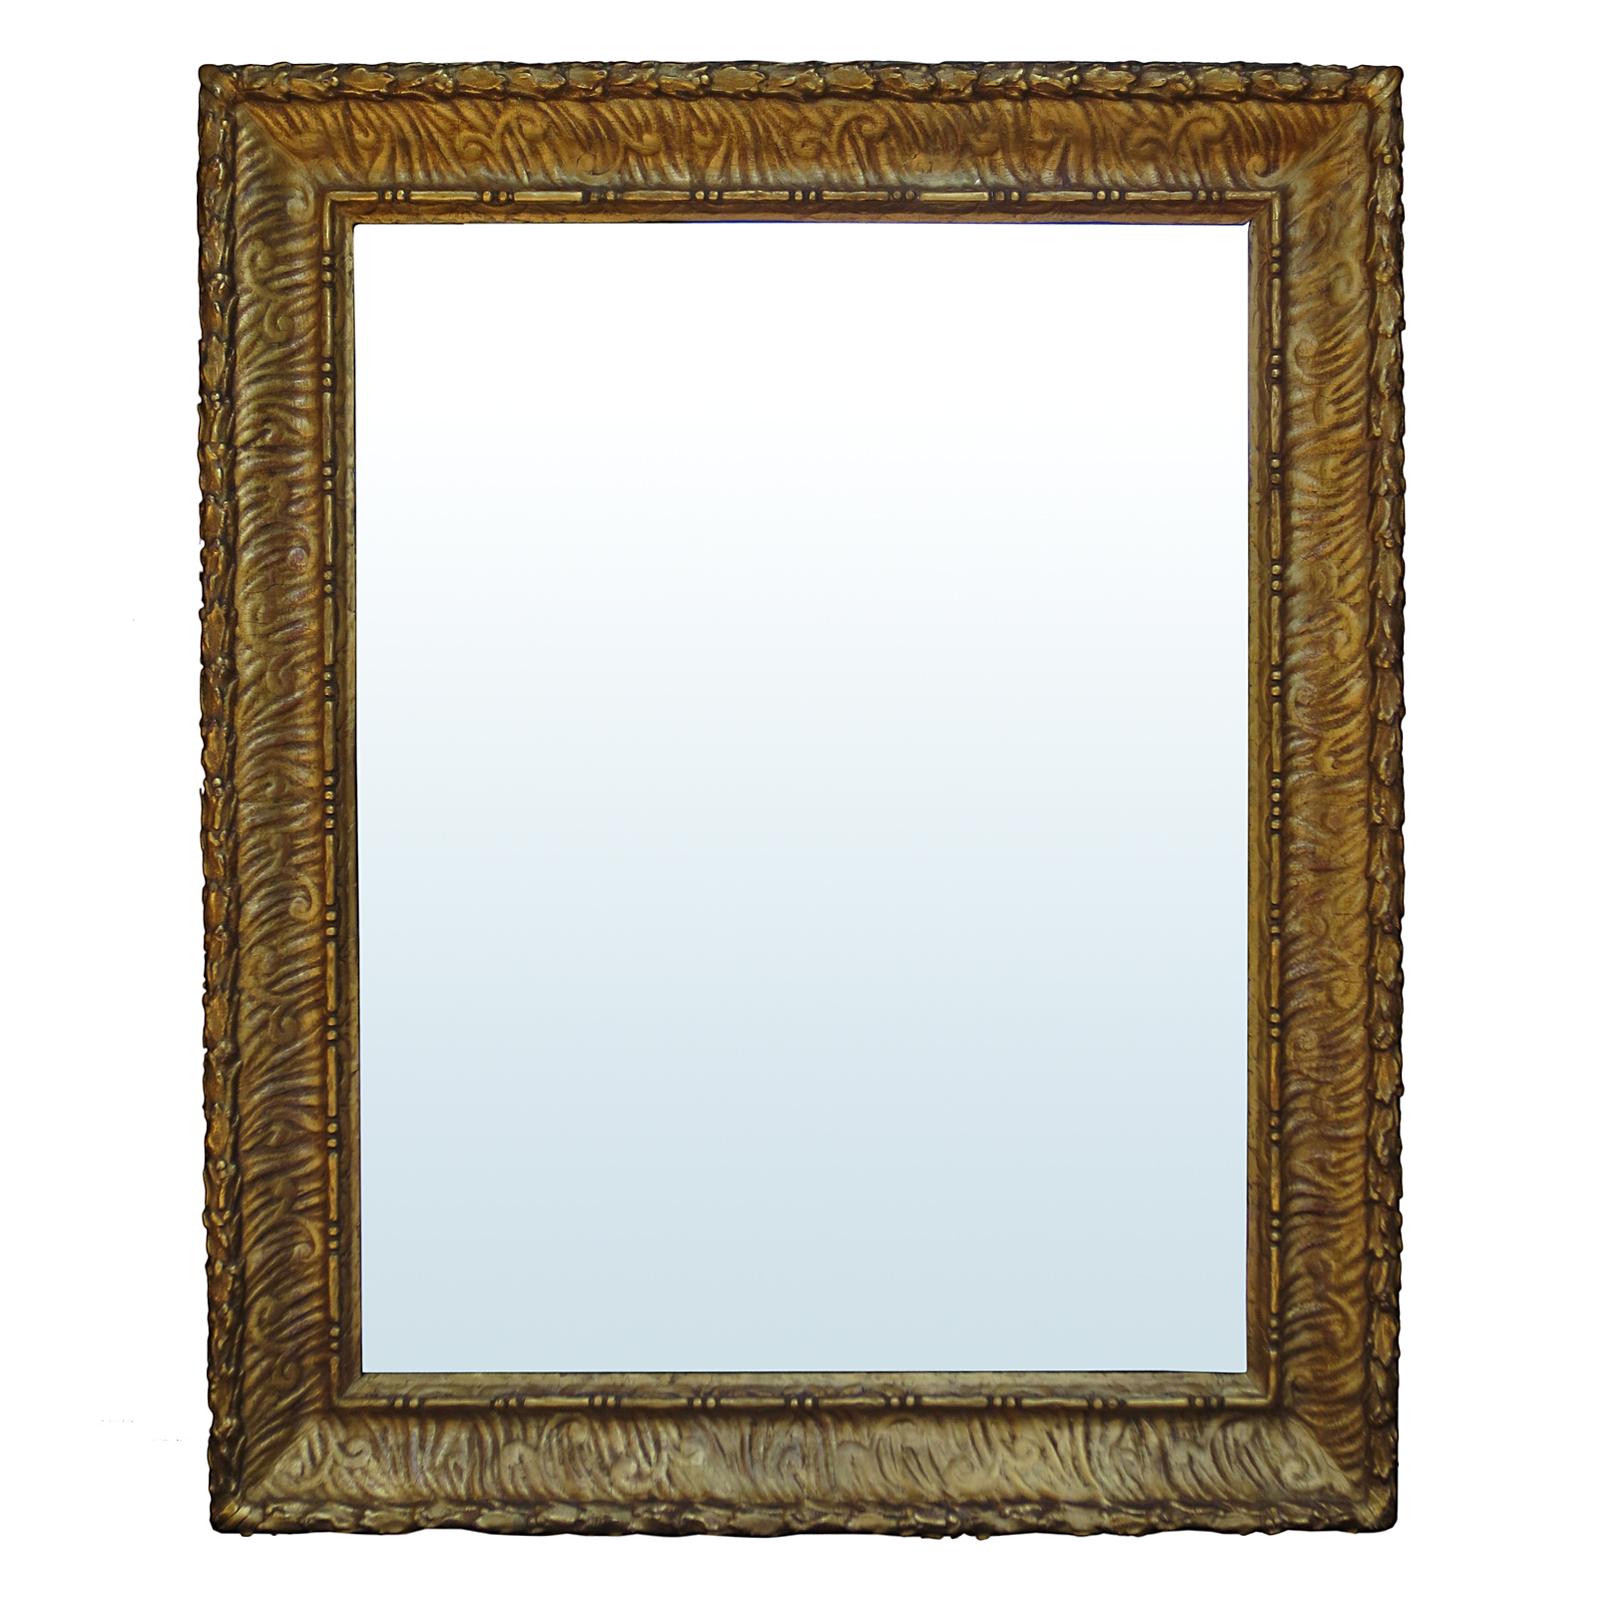 Early Giltwood Frame as Mirror